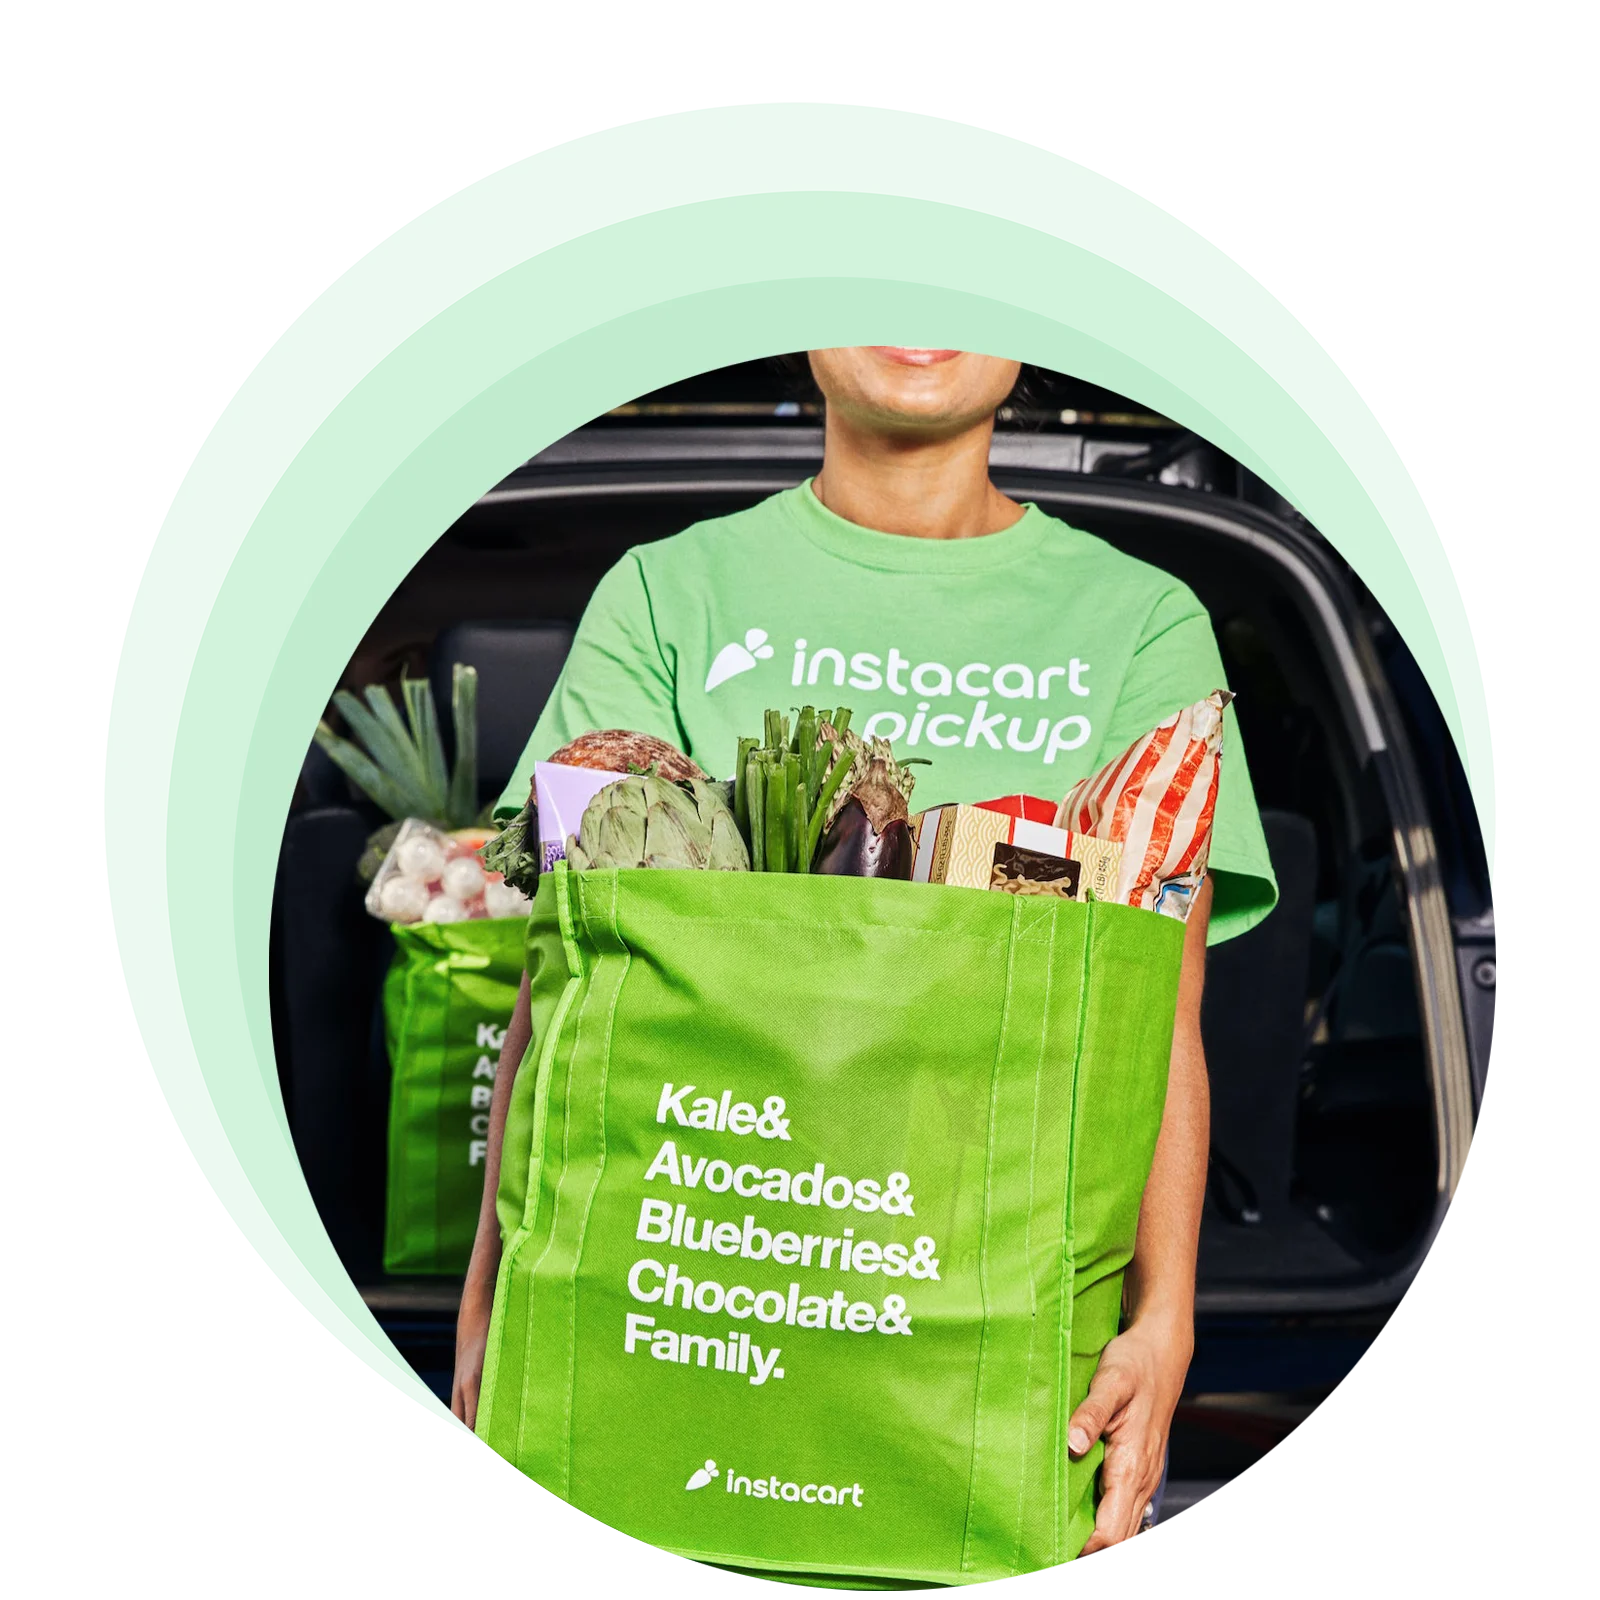 Loans-For-Instacart-Drivers-gigcheck